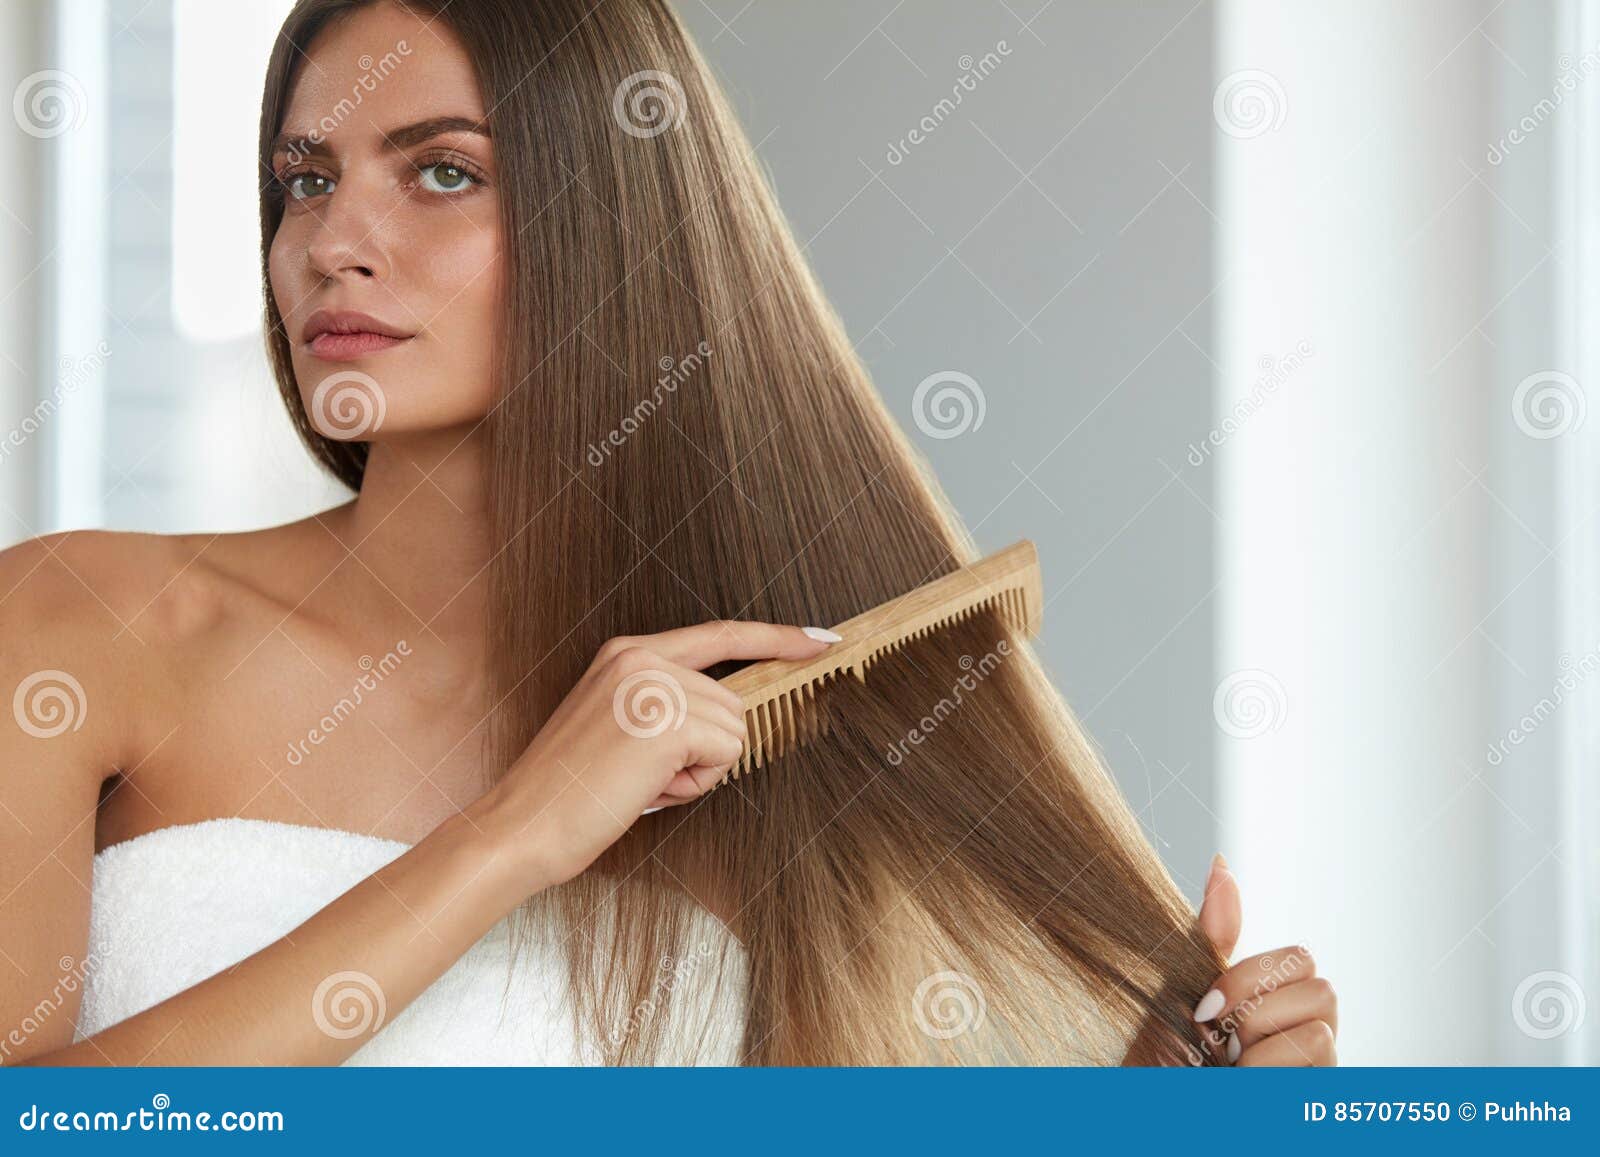 Brushing Hair. Woman Hairbrushing Beautiful Long Hair with Comb Stock Photo  - Image of styling, resolution: 85707550